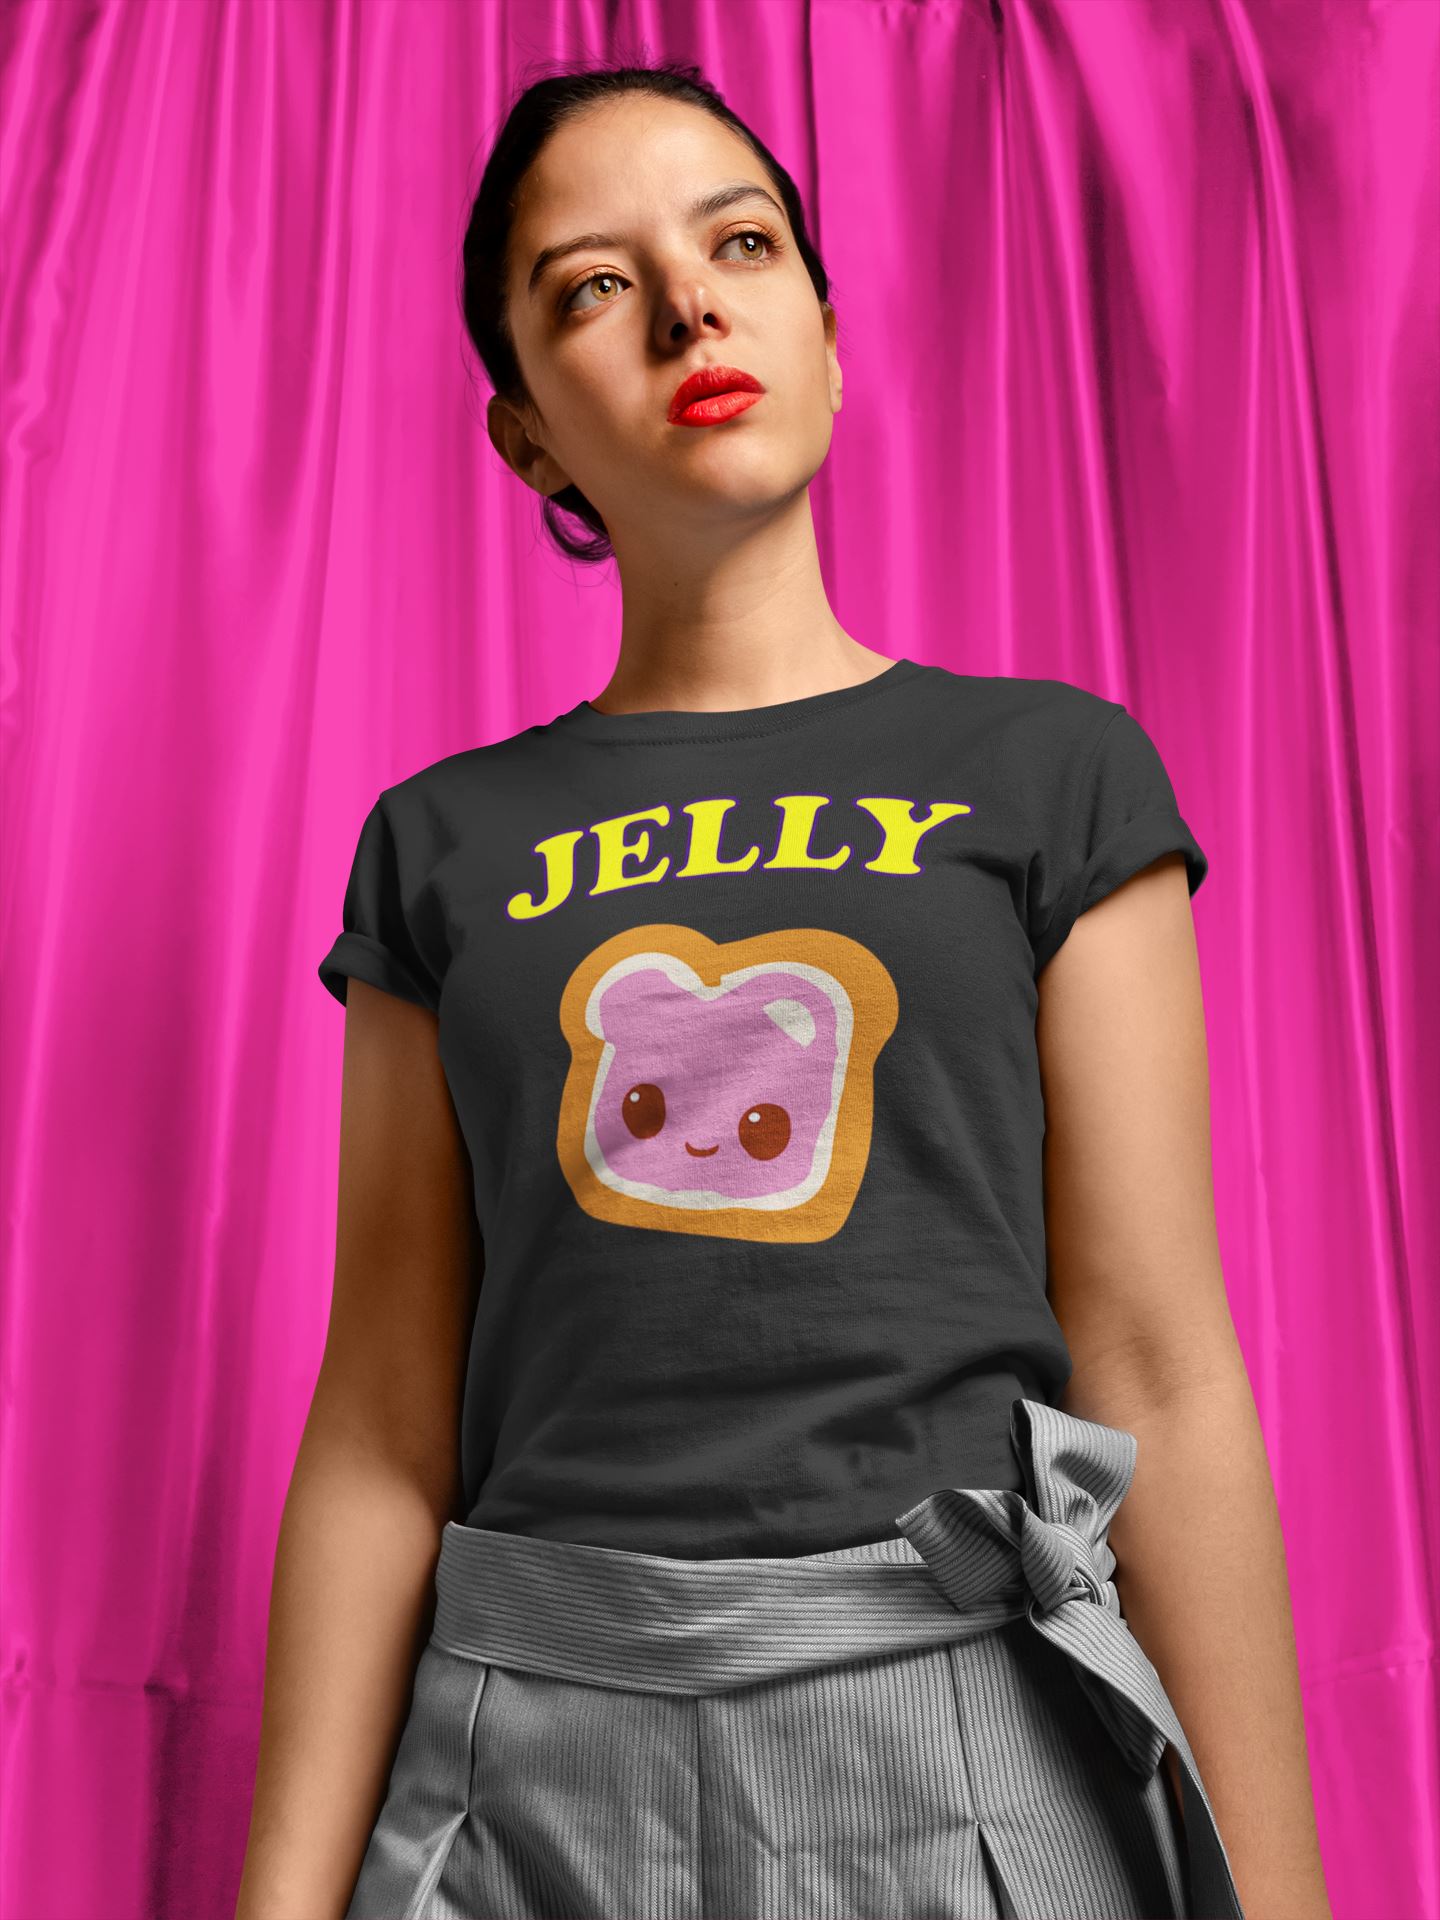 Peanut Butter & Jelly Matching Couple and Friends Black T Shirt for Men and Women Shirts & Tops Printrove 